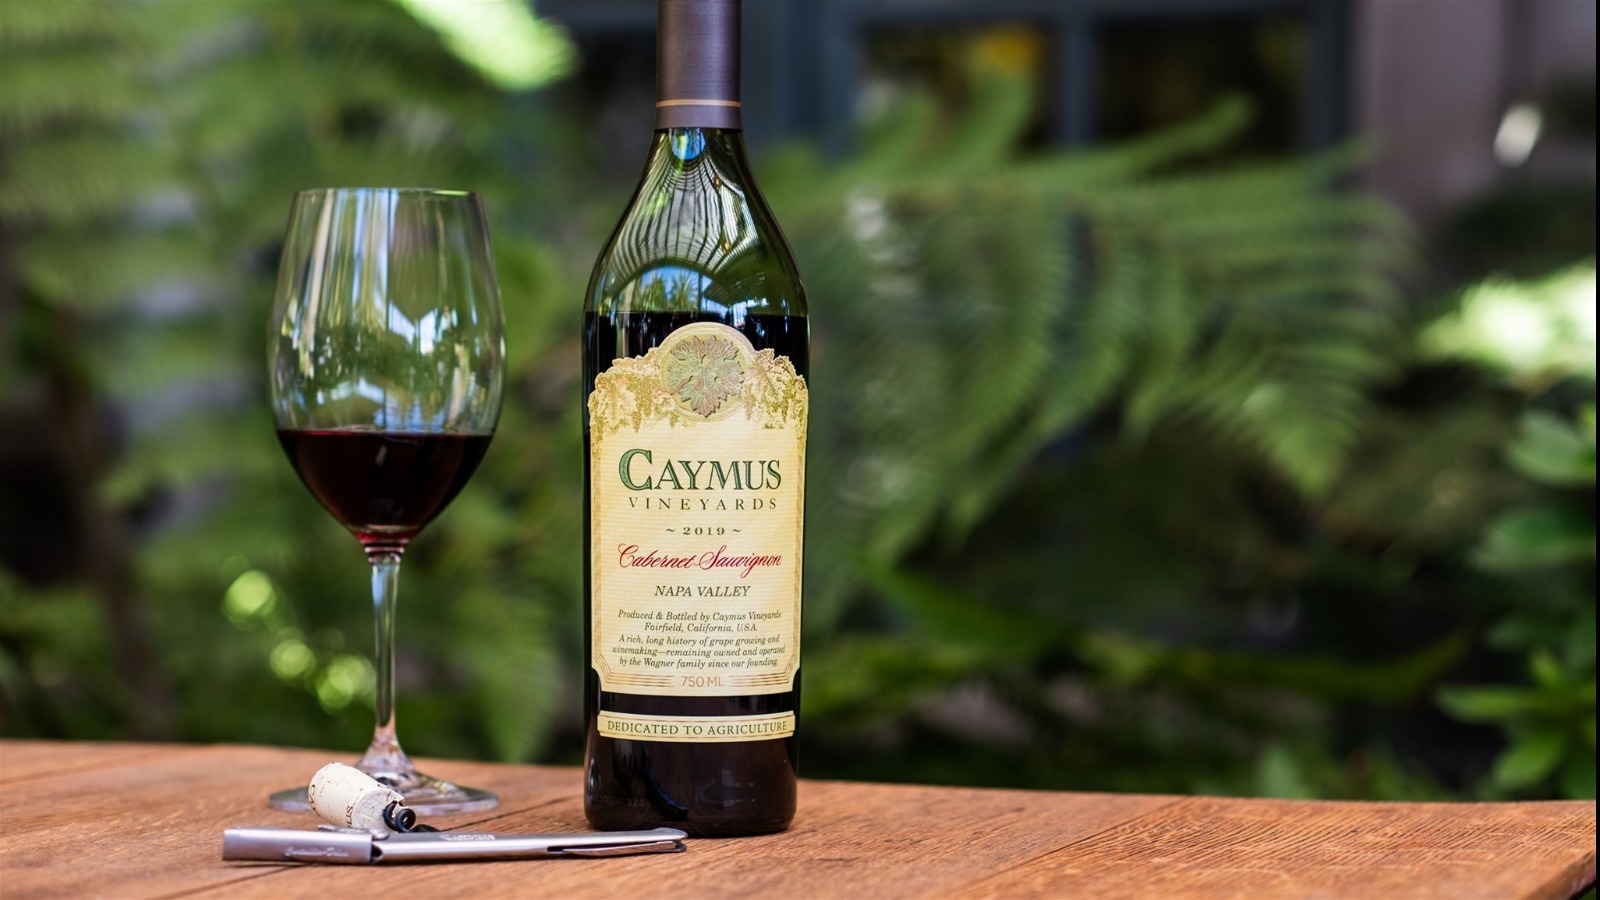 https://www.tastingtable.com/img/gallery/caymus-napa-valley-cabernet-sauvignon-the-ultimate-bottle-guide/l-intro-1655304455.jpg